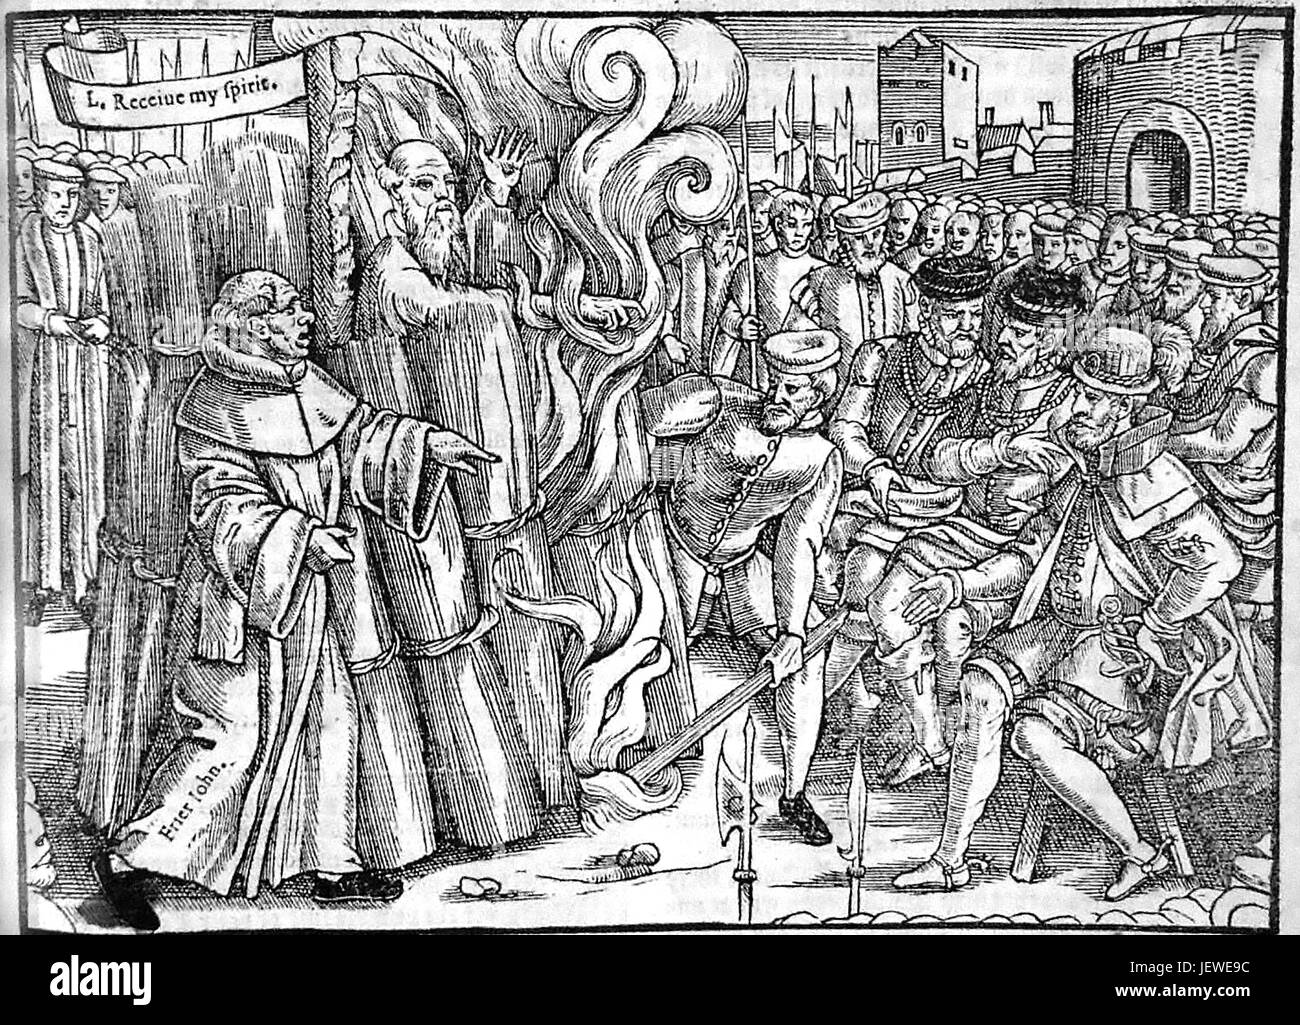 THOMAS CRANMER (1489-1556) English reformation religious leader burnt at the stake as shown in this engraving from Foxe's Book of Martyrs, 1563 Stock Photo